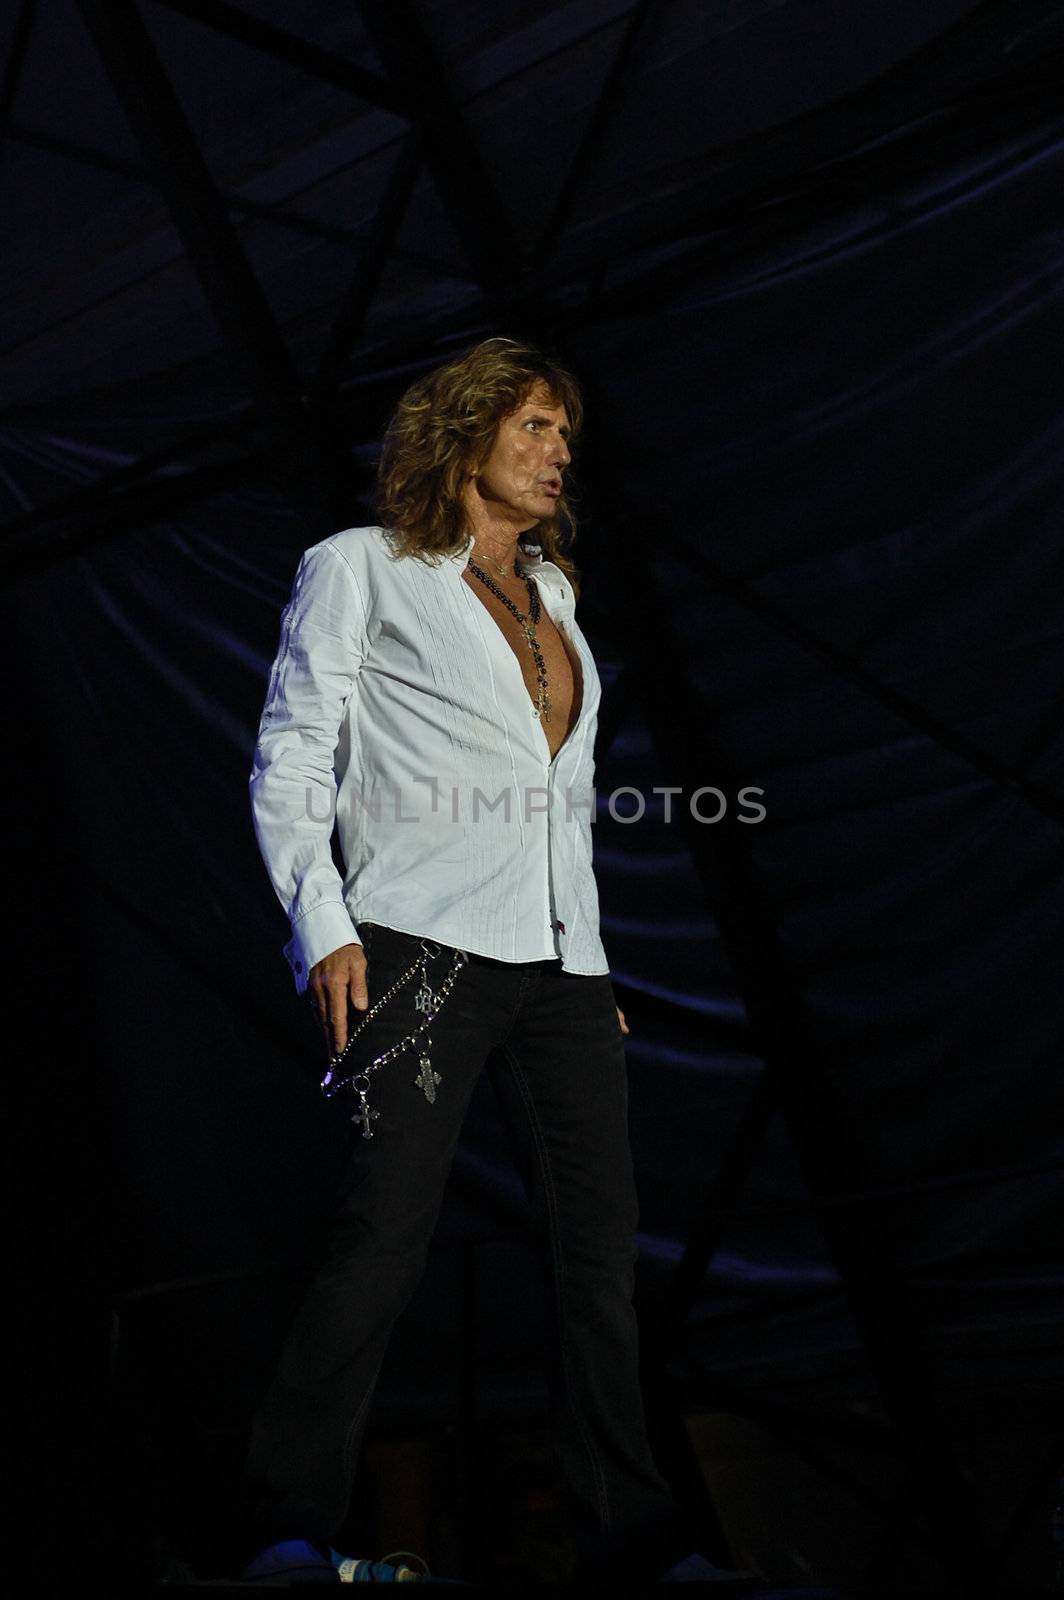 Whitesnake performs at Romexpo July 8, 2008 in Bucharest.